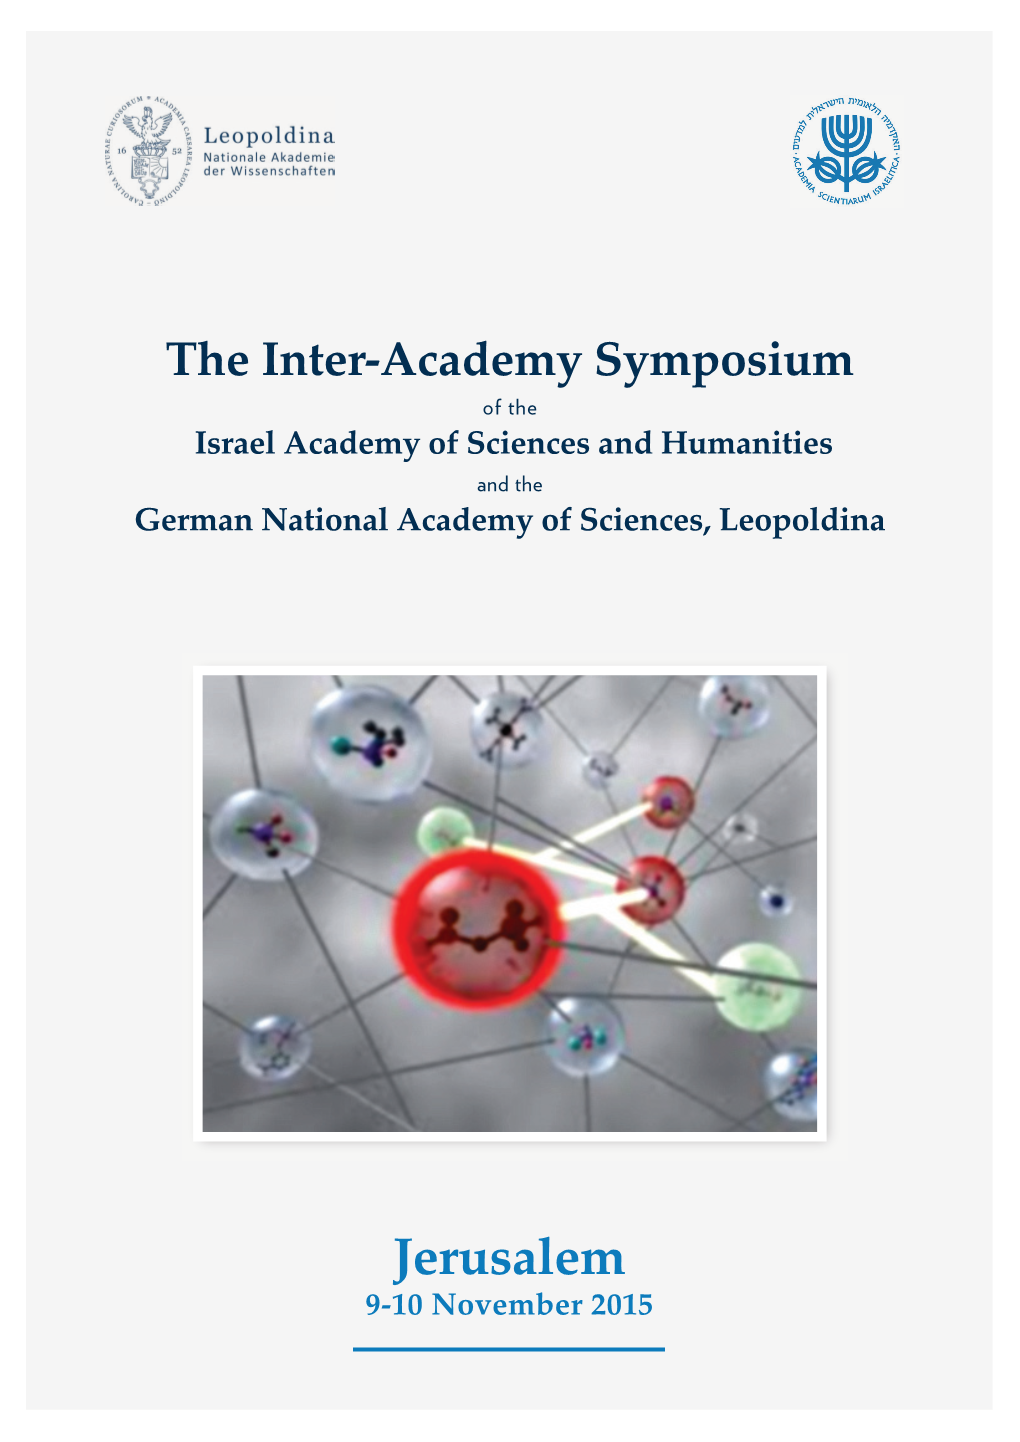 Jerusalem 9-10 November 2015 the Inter-Academy Symposium of the Israel Academy of Sciences and Humanities and the German National Academy of Sciences, Leopoldina